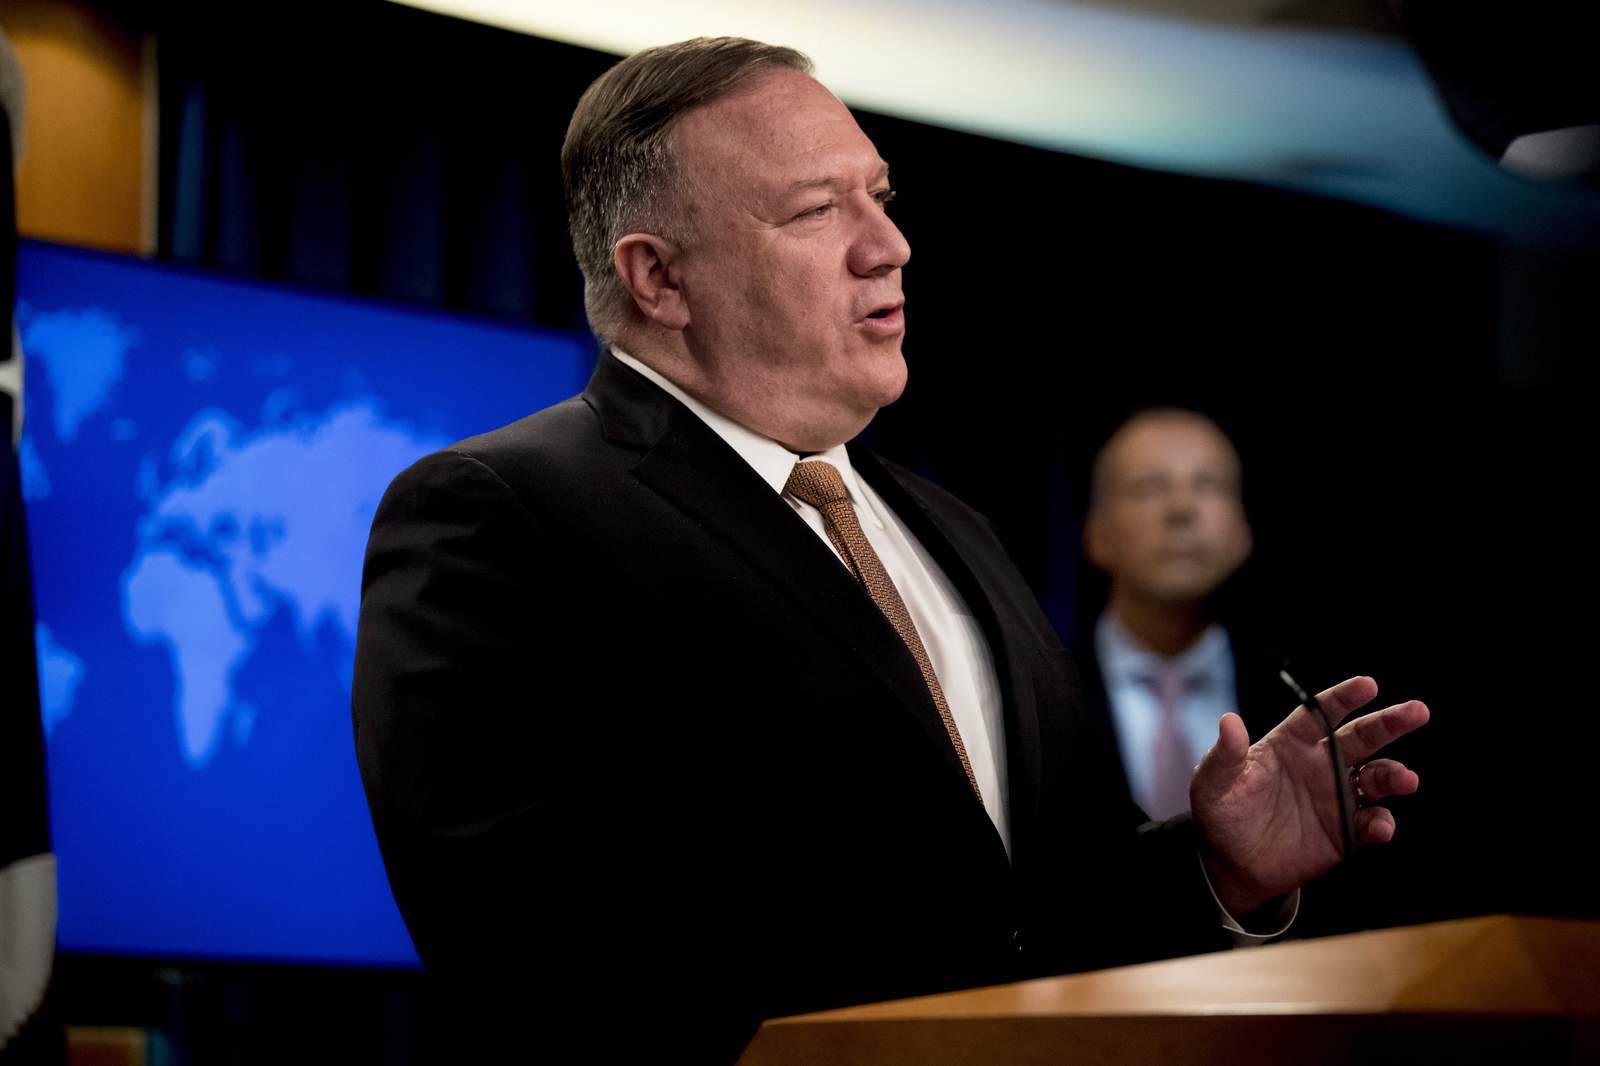 Pompeo downplays possibility of summit with North Korea